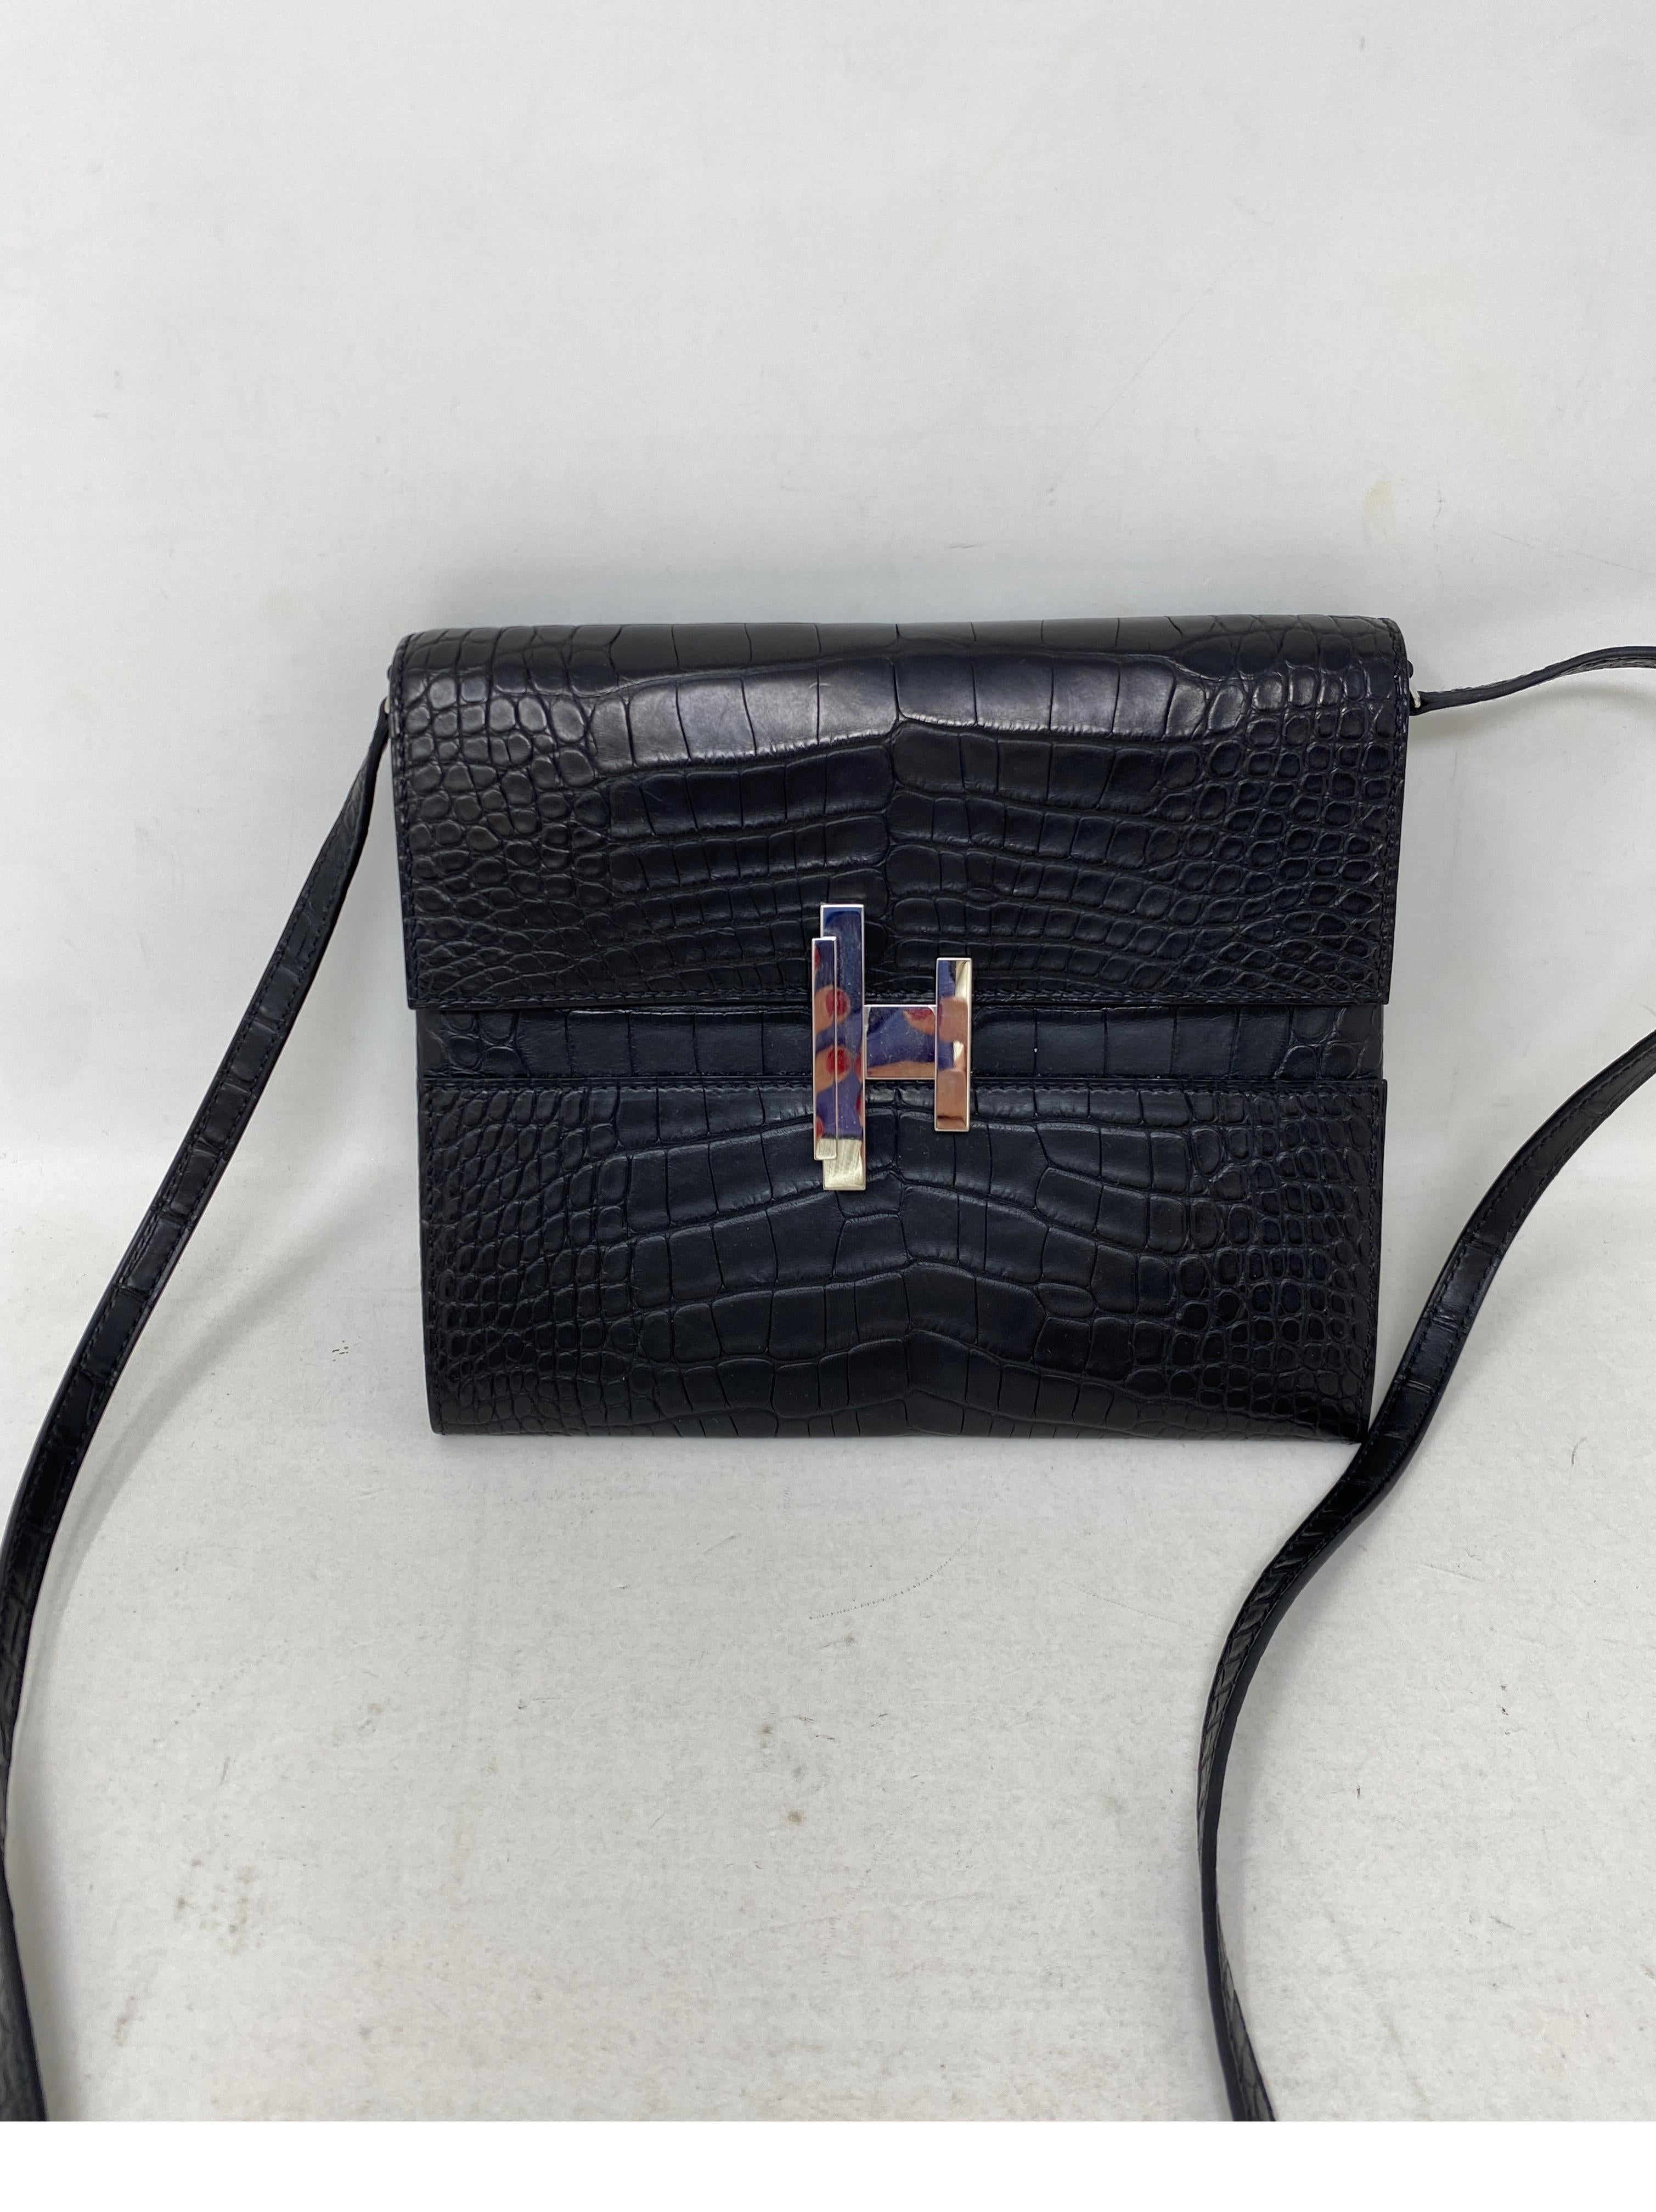 Hermes Black Crocodile Crossbody Bag. Rare and beautiful small crossbody bag from Hermes. Silver palladium hardware. Strap can be taken off and bag can be worn as a clutch. H closure twists to open. Excellent like new condition. Includes dust bag